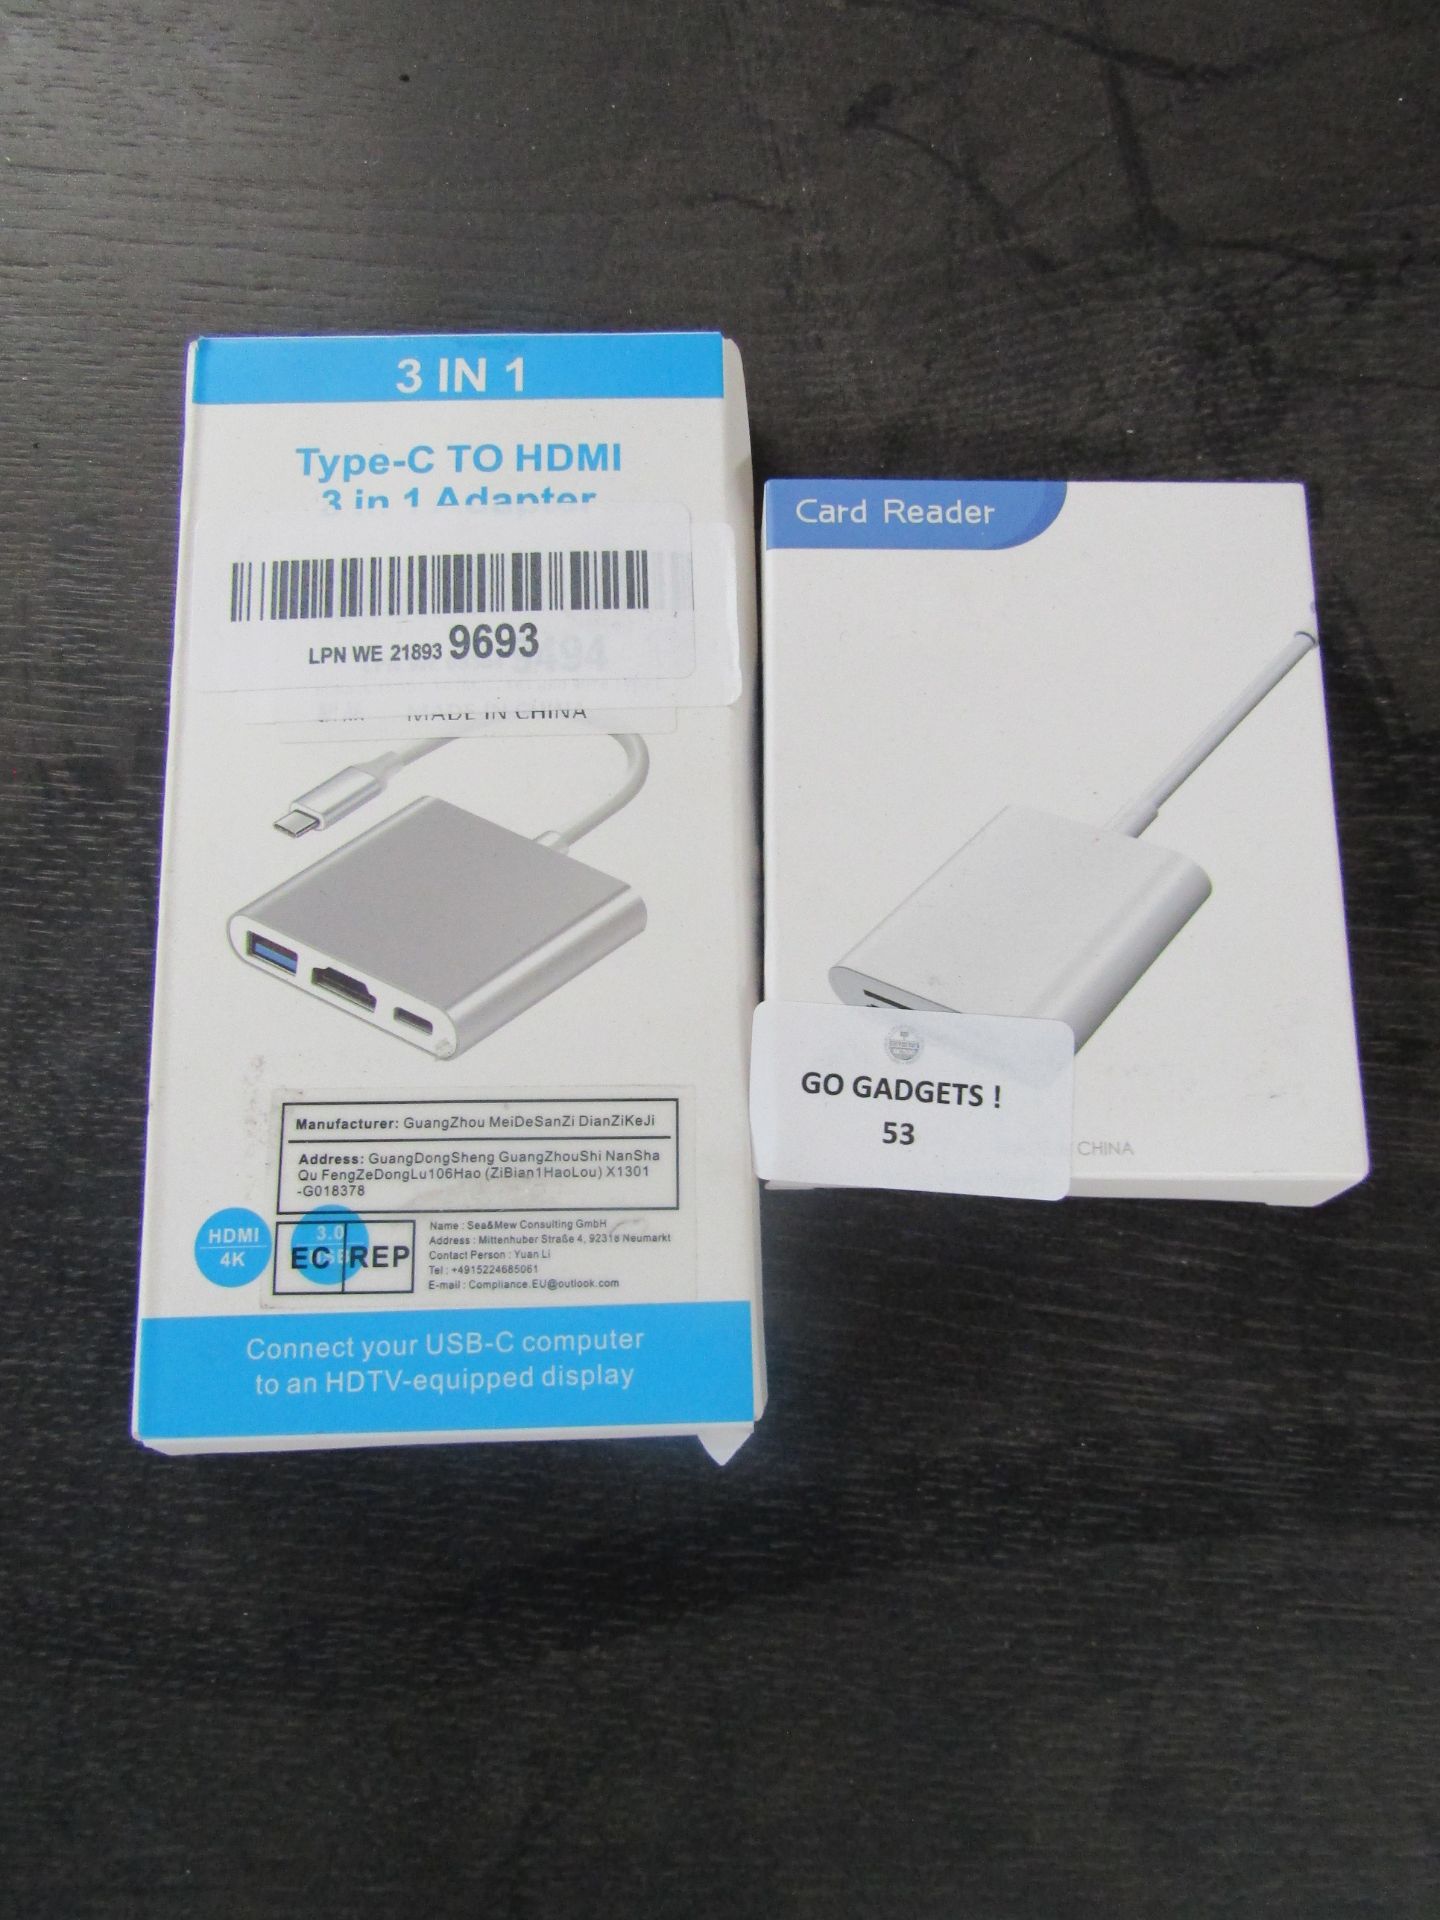 2x Items Being - 1x Card Reader - 1x 3in1 Type-C To HDMI Adapter - Both Unchecked & Boxed.